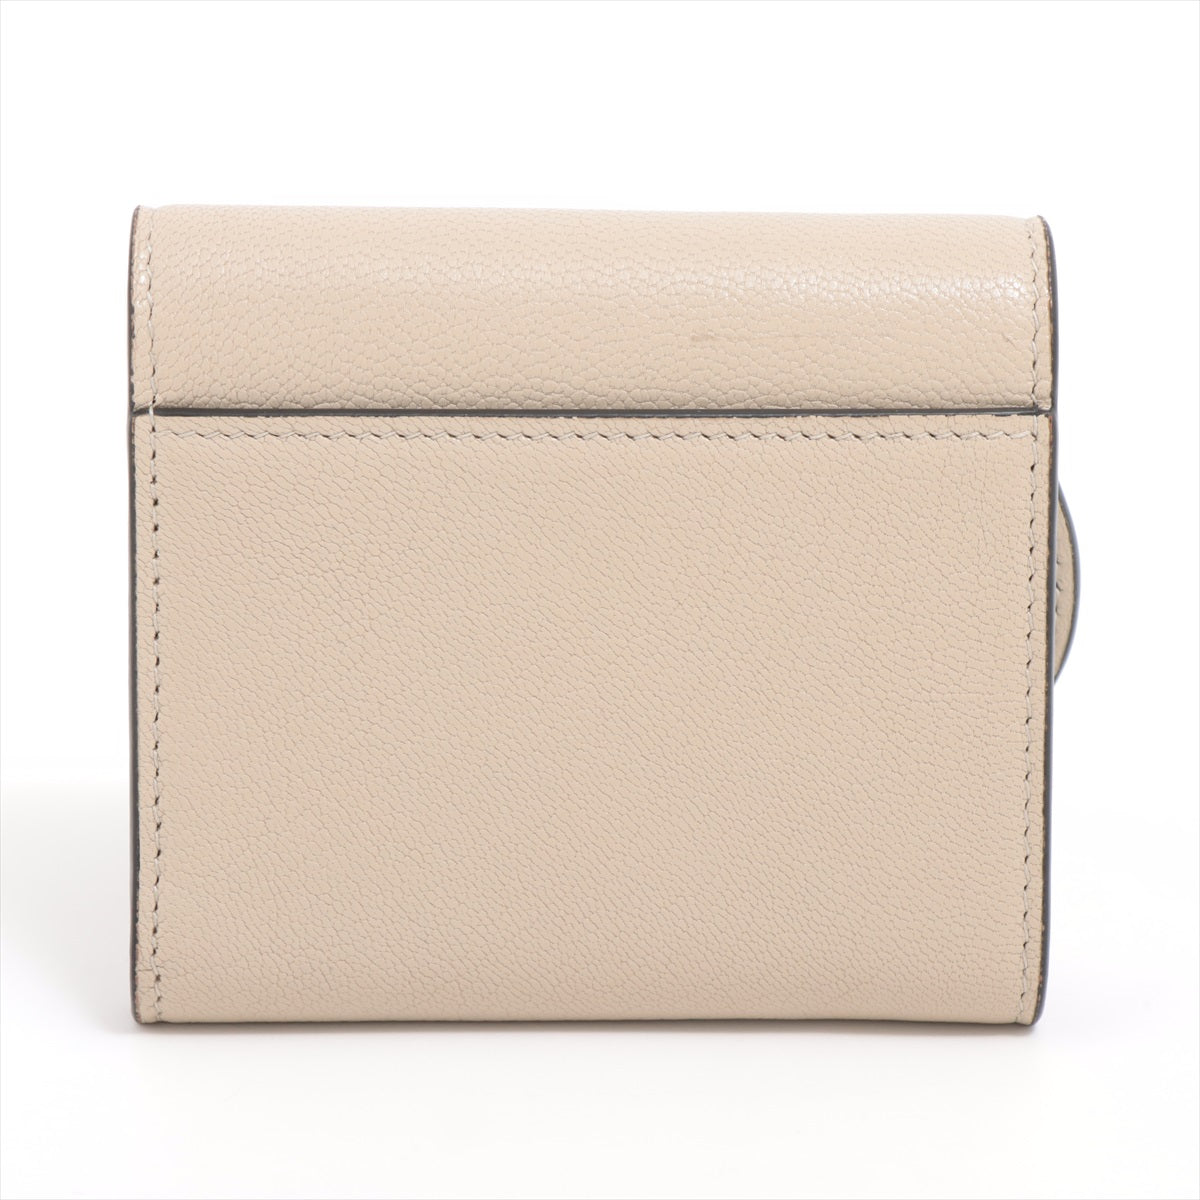 DIOR Saddle Leather Compact Wallet Beige